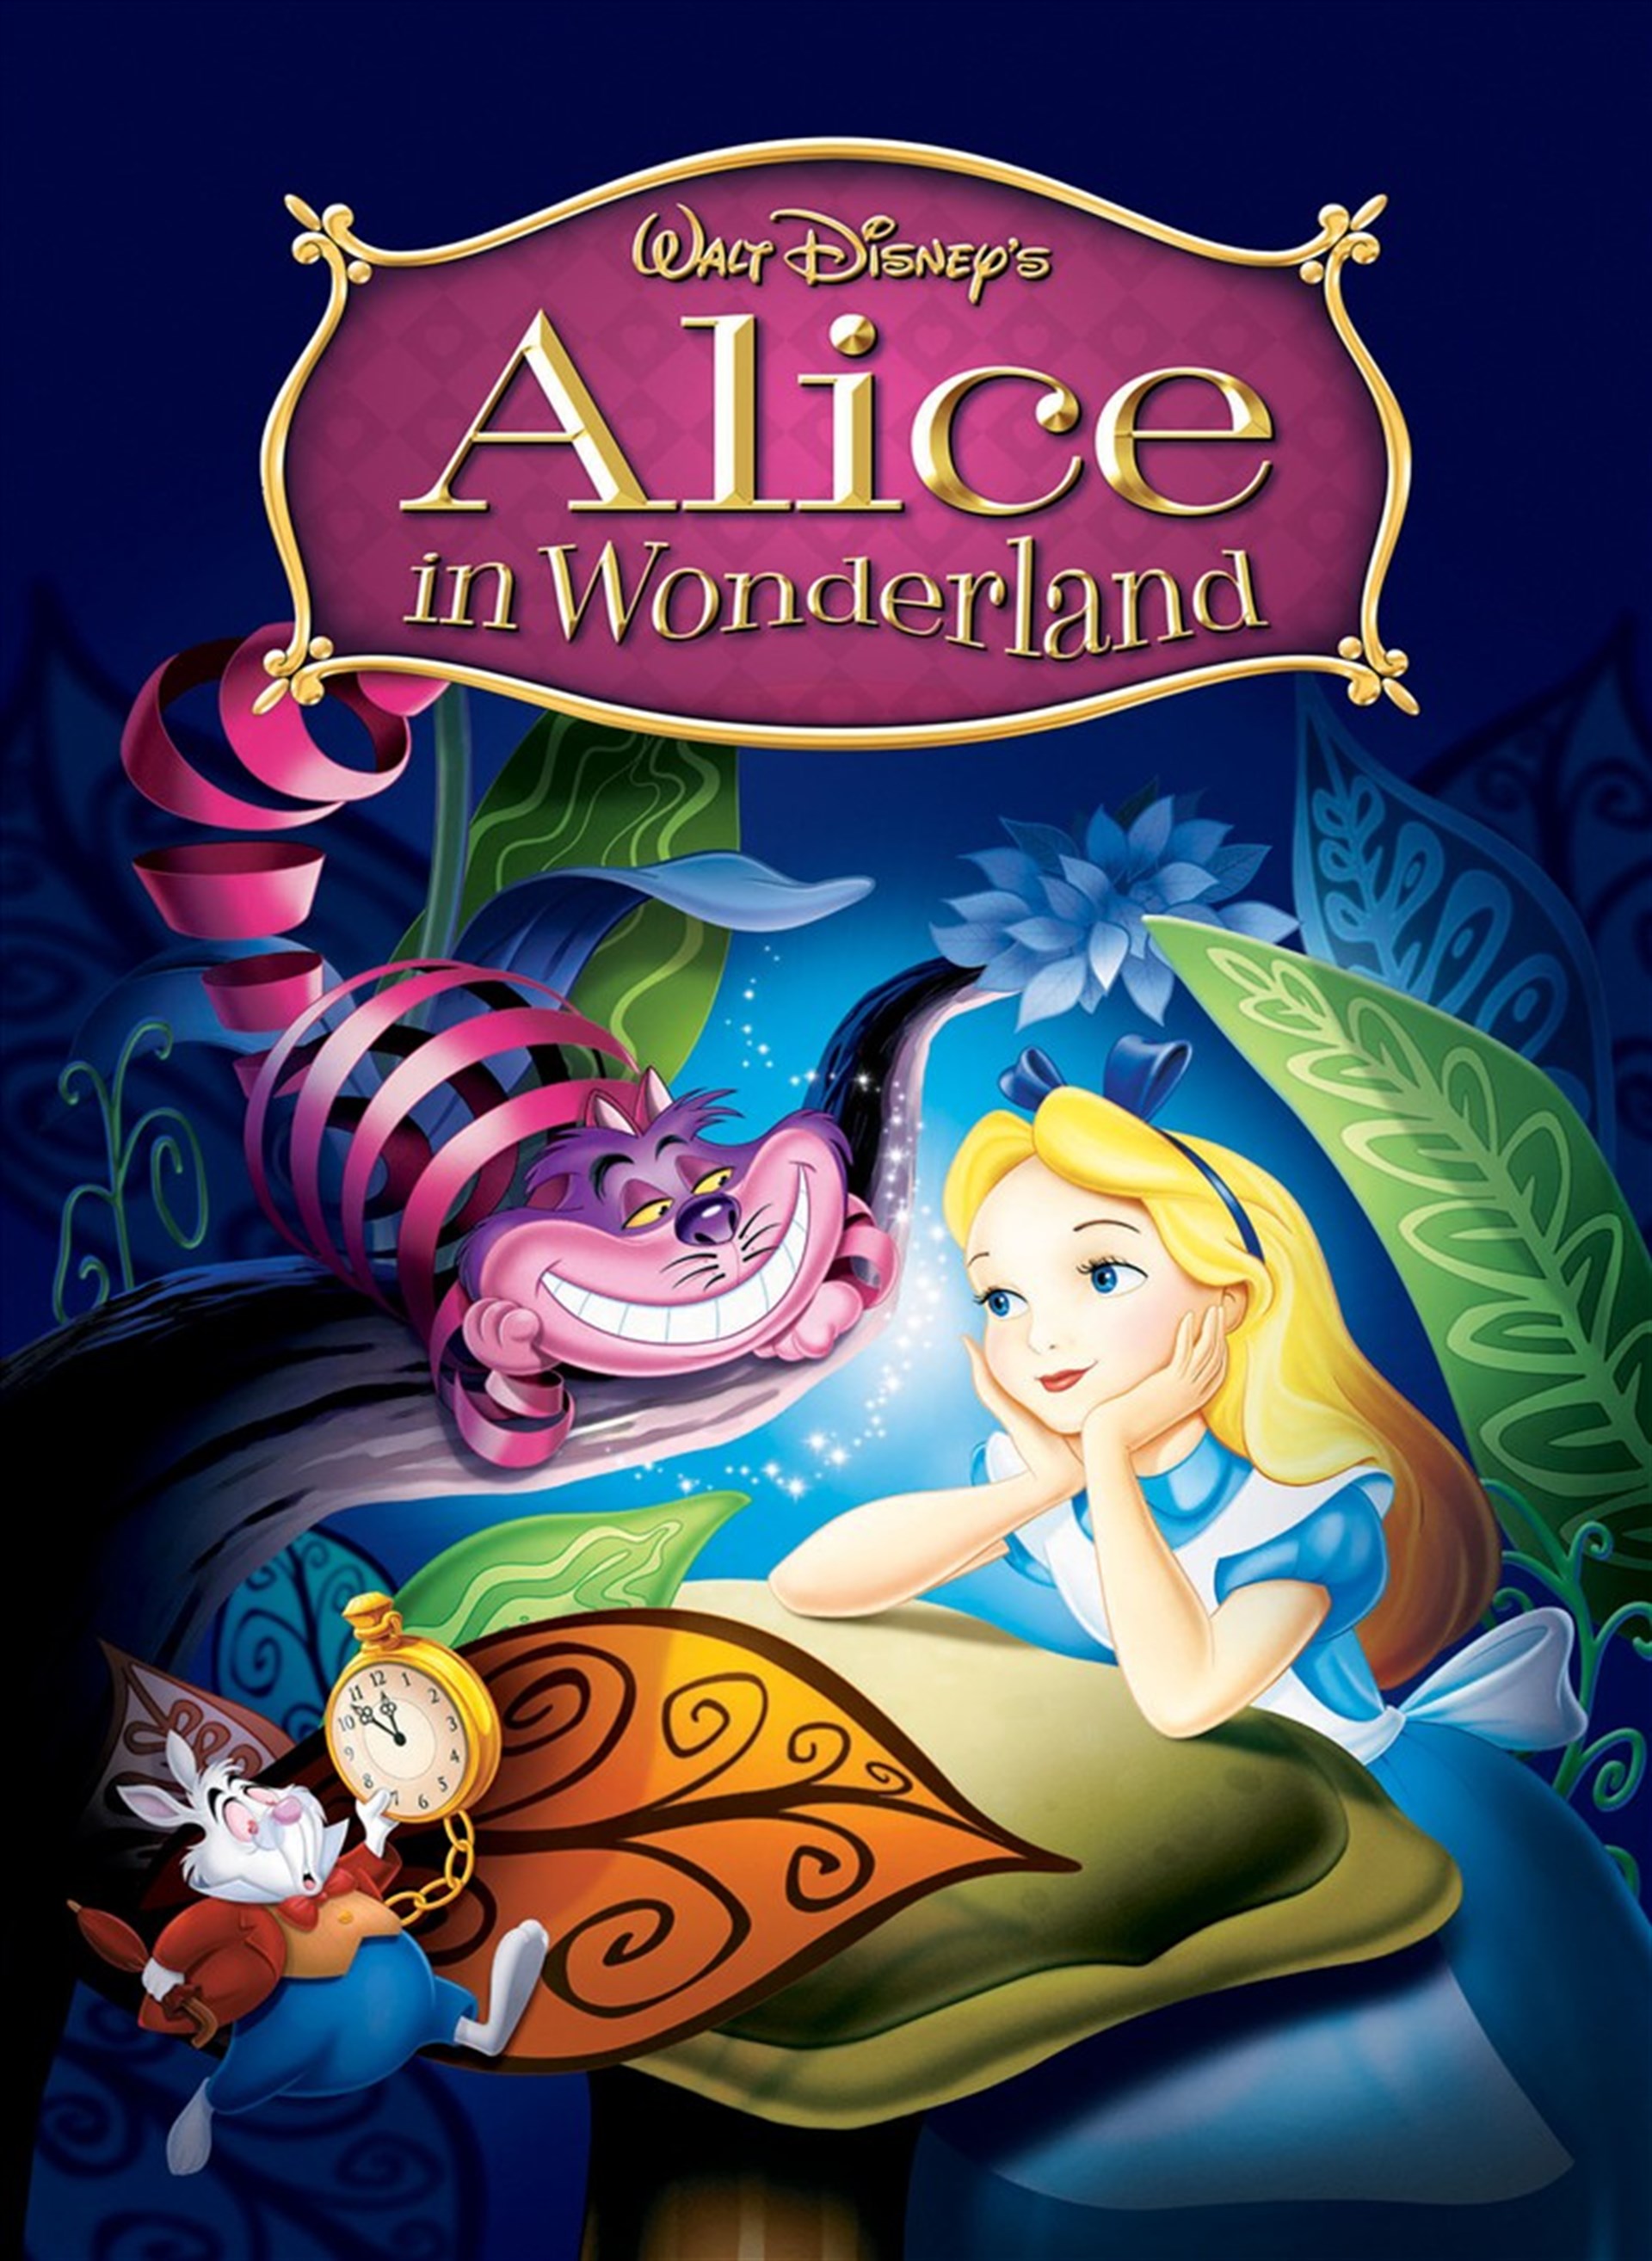 carlton blues recommends Watch Alice In Wonderland 1951 Free